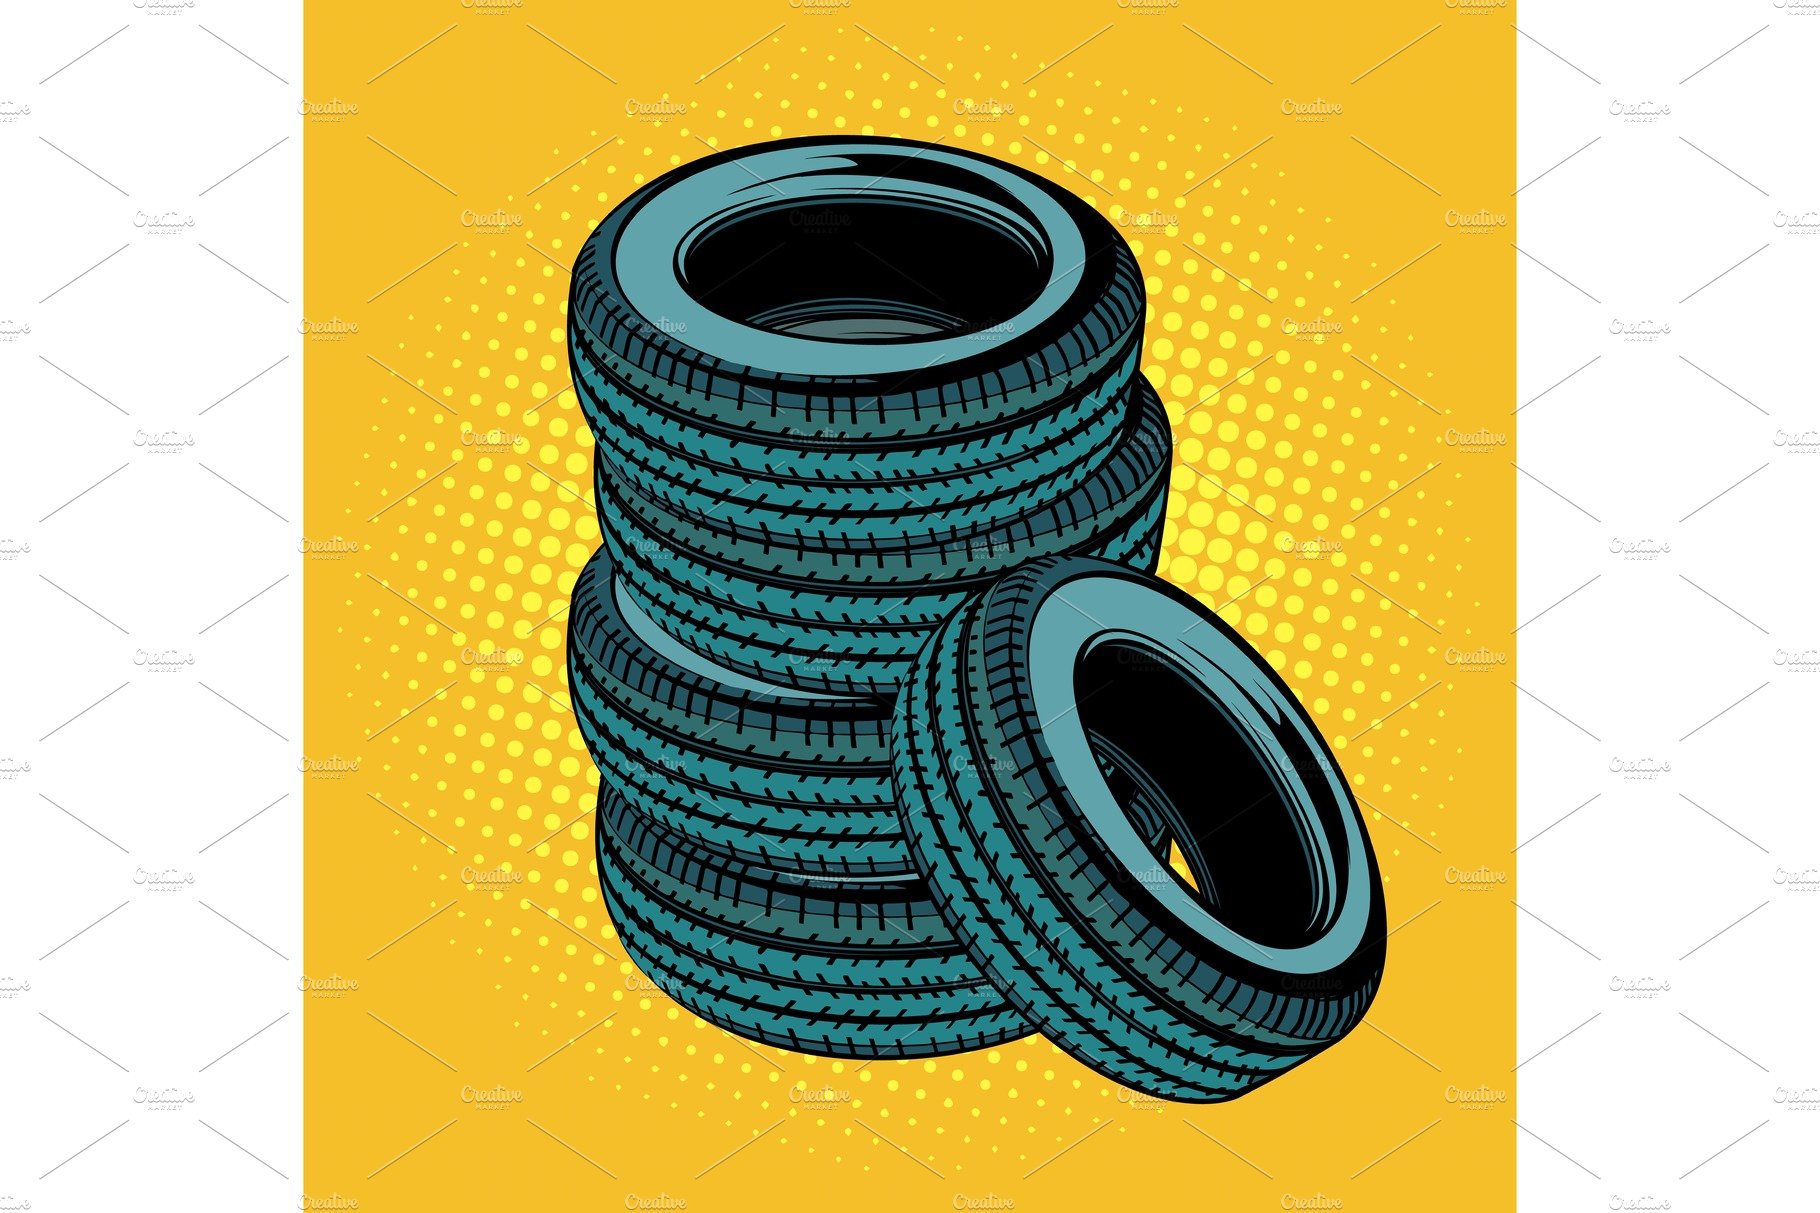 A stack of car tires cover image.